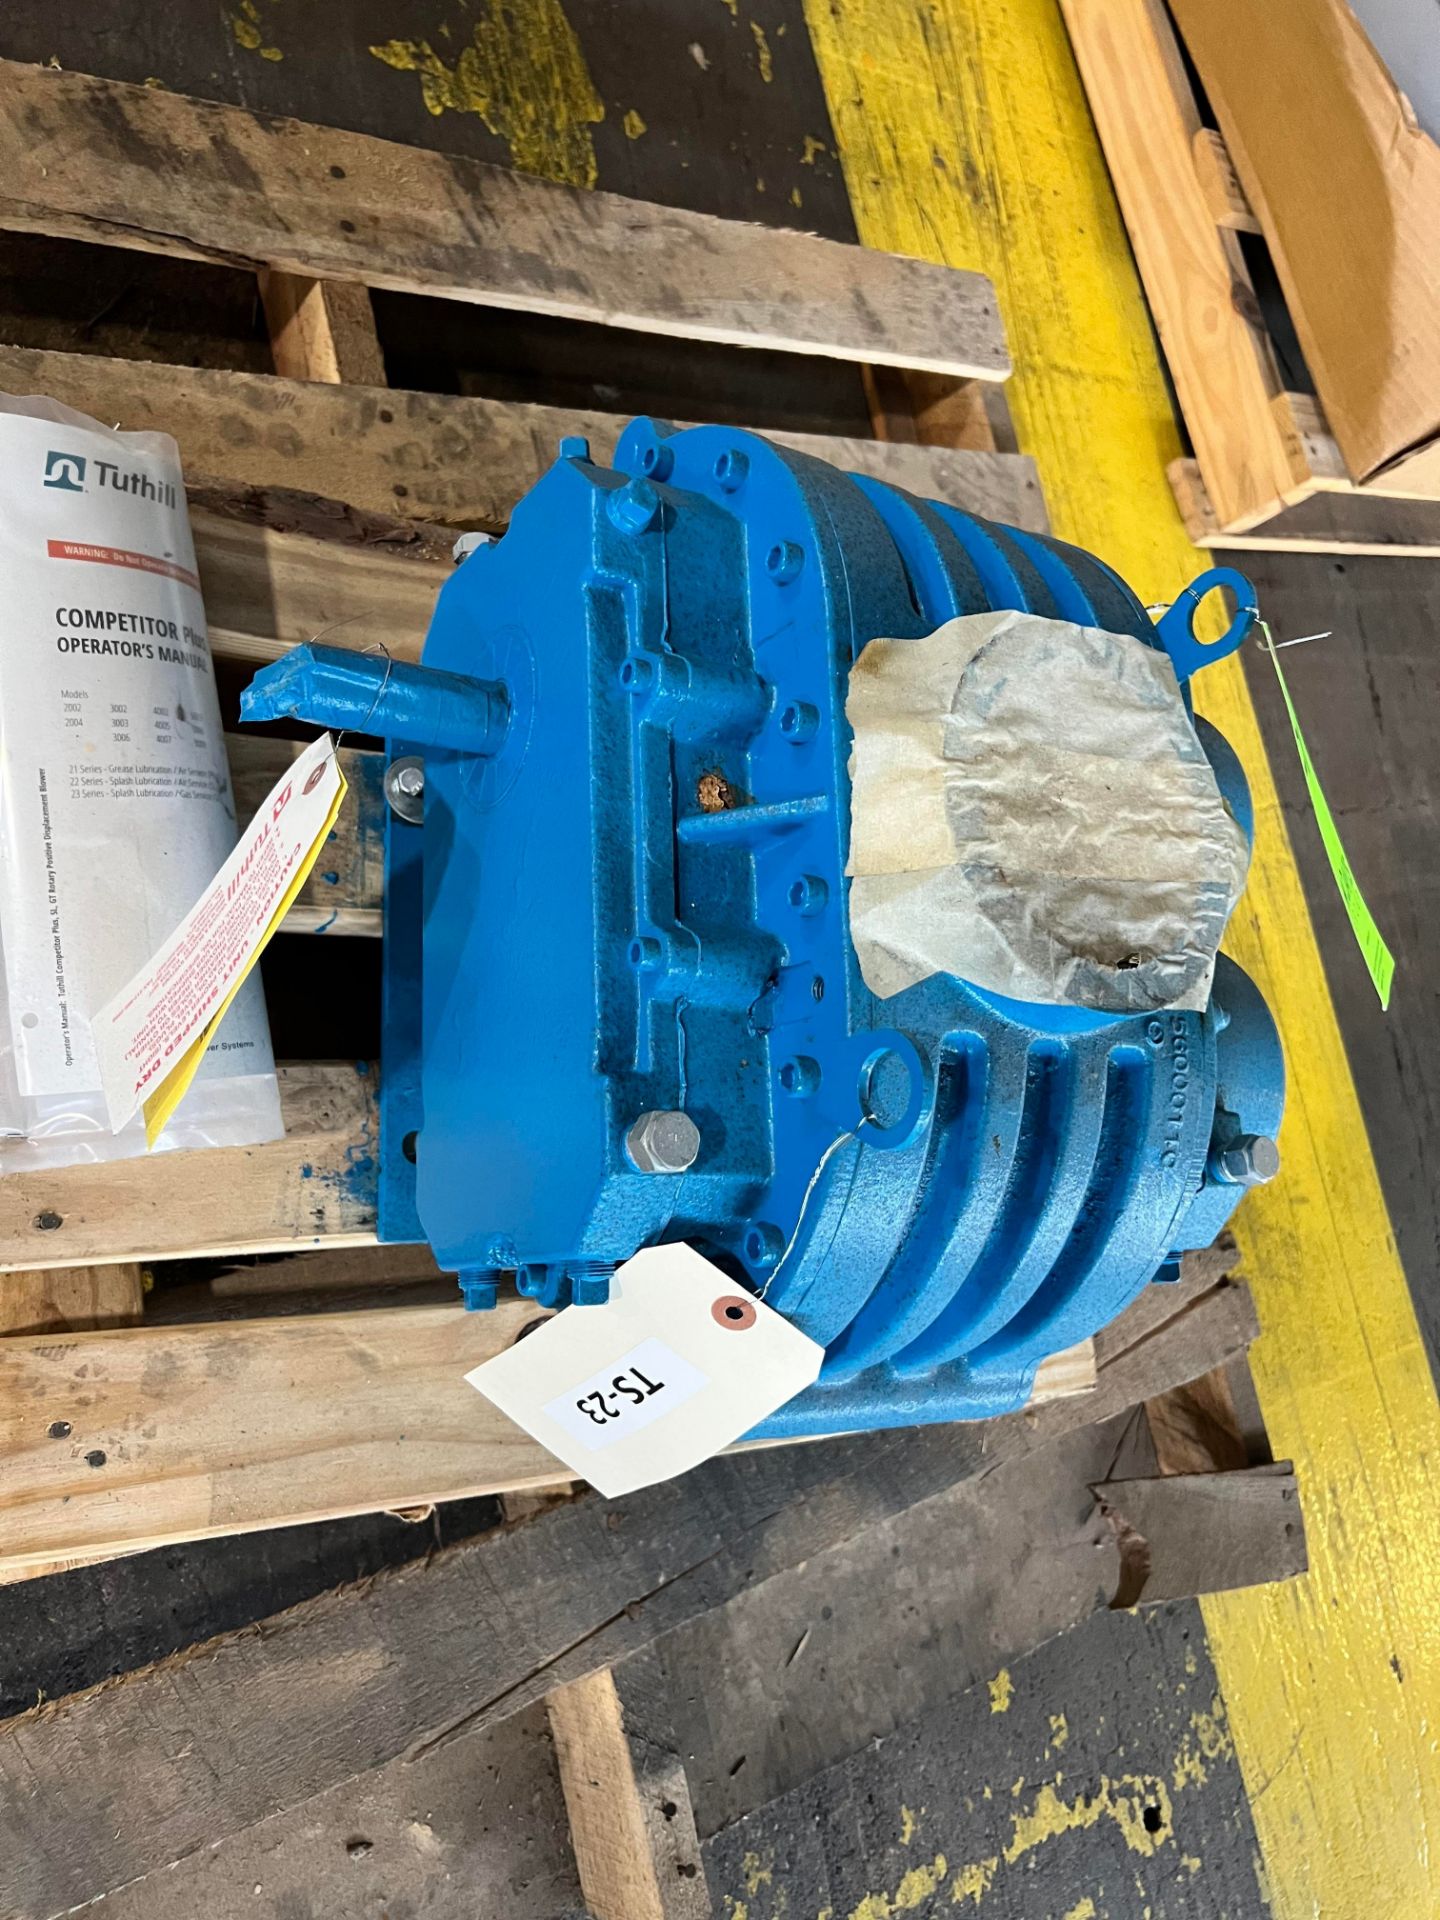 NEW 2016 TUTHILL ROTARY POSITIVE DISPLACEMENT BLOWER PUMP HEAD, MODEL 5006-22L 3N, S/N 3366161602, - Image 2 of 5